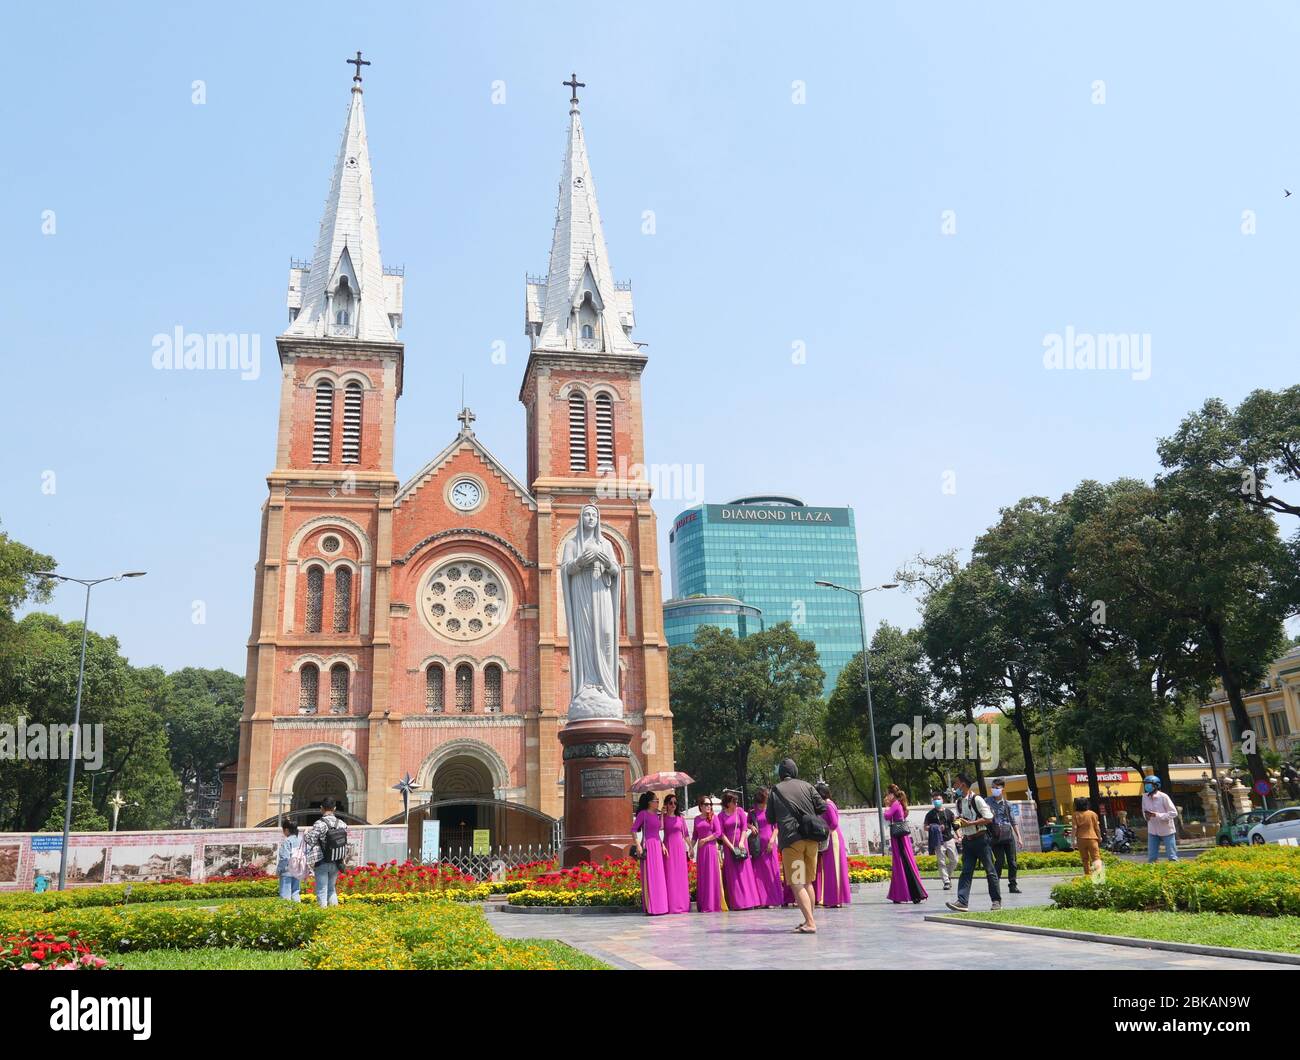 Ho Chi Minh City, Vietnam - April 30, 2020: A big group of ladies in bright magenta traditional Vietnamese long dress in front of the Notre-Dame Cathe Stock Photo